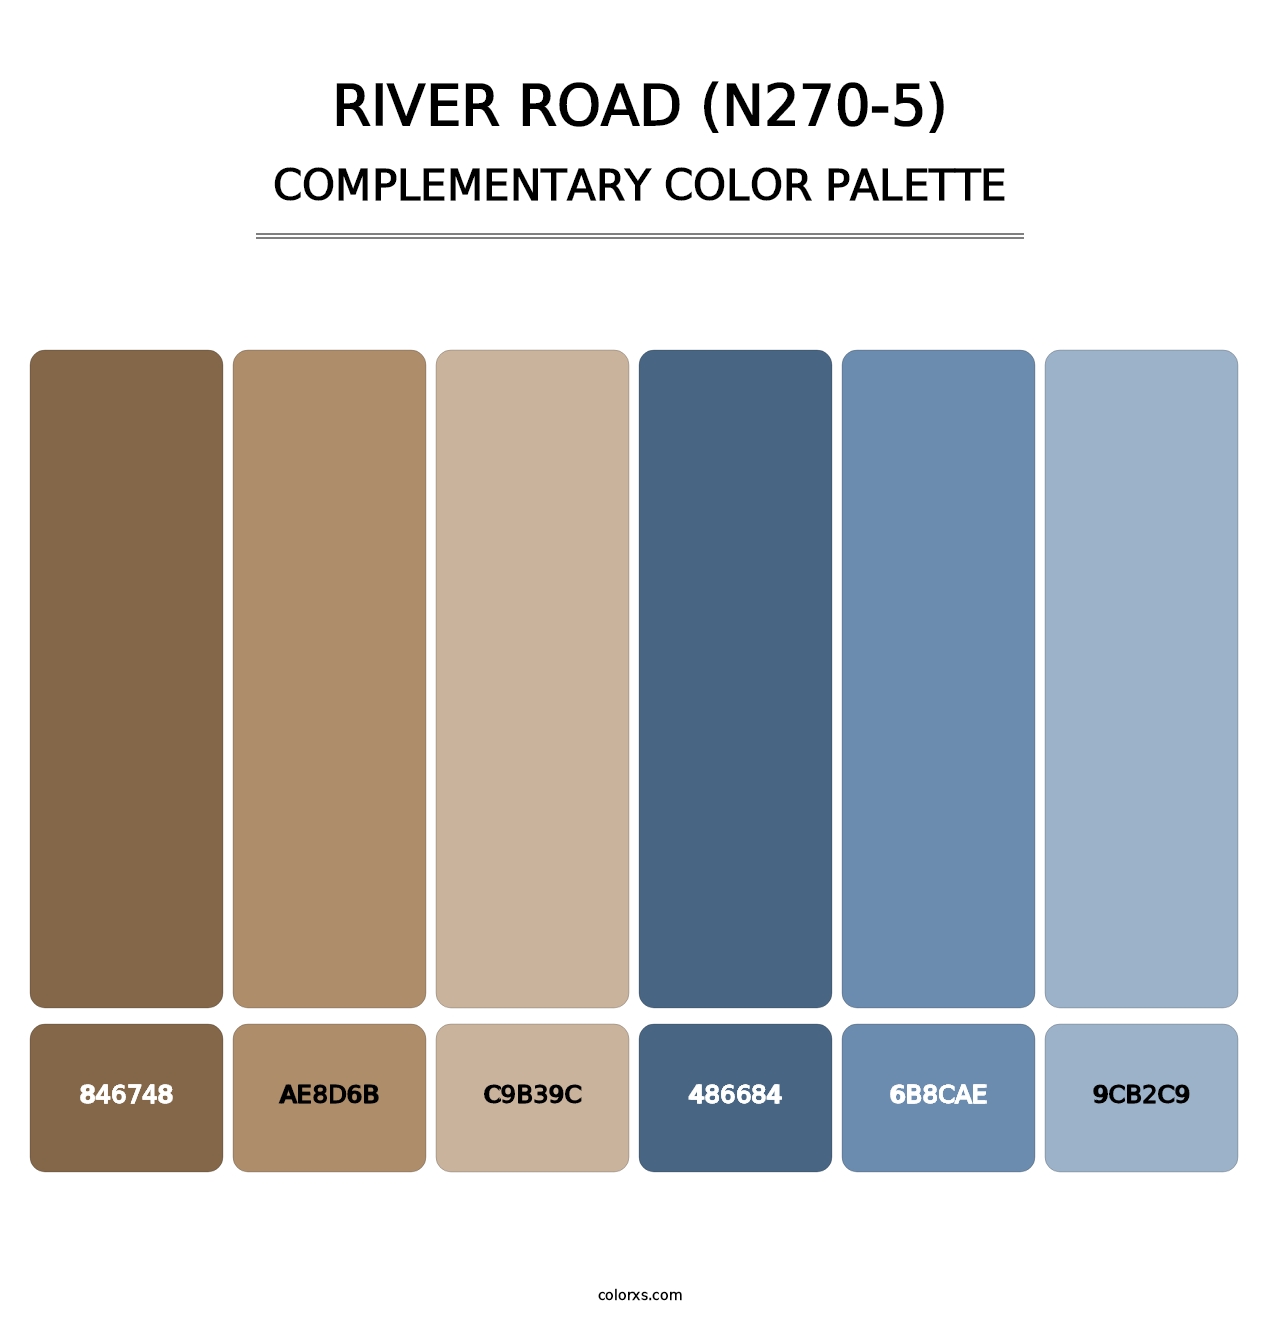 River Road (N270-5) - Complementary Color Palette